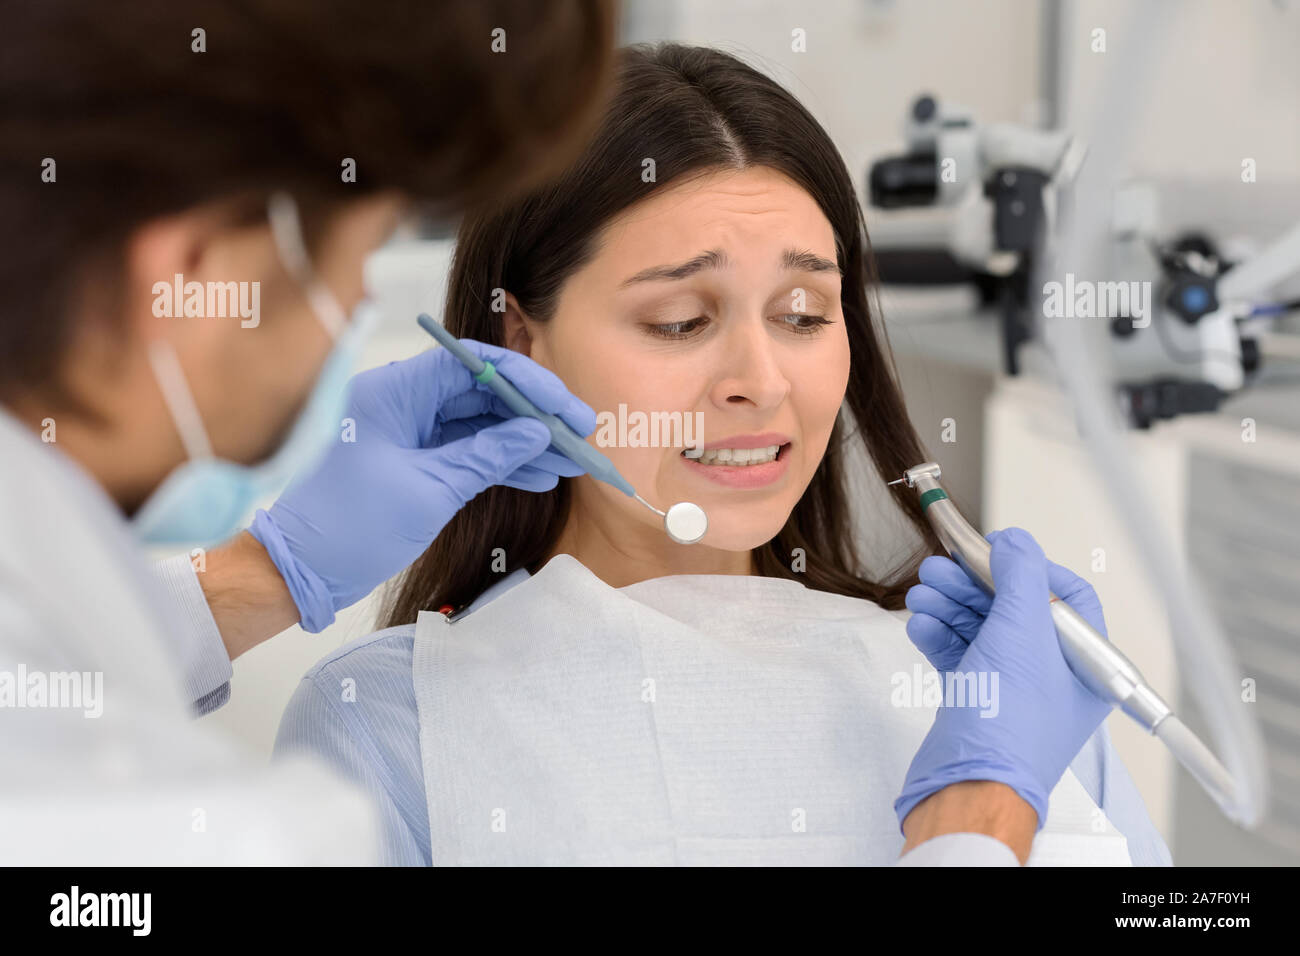 Scared woman at dental office, looking panickly at dental tools Stock Photo